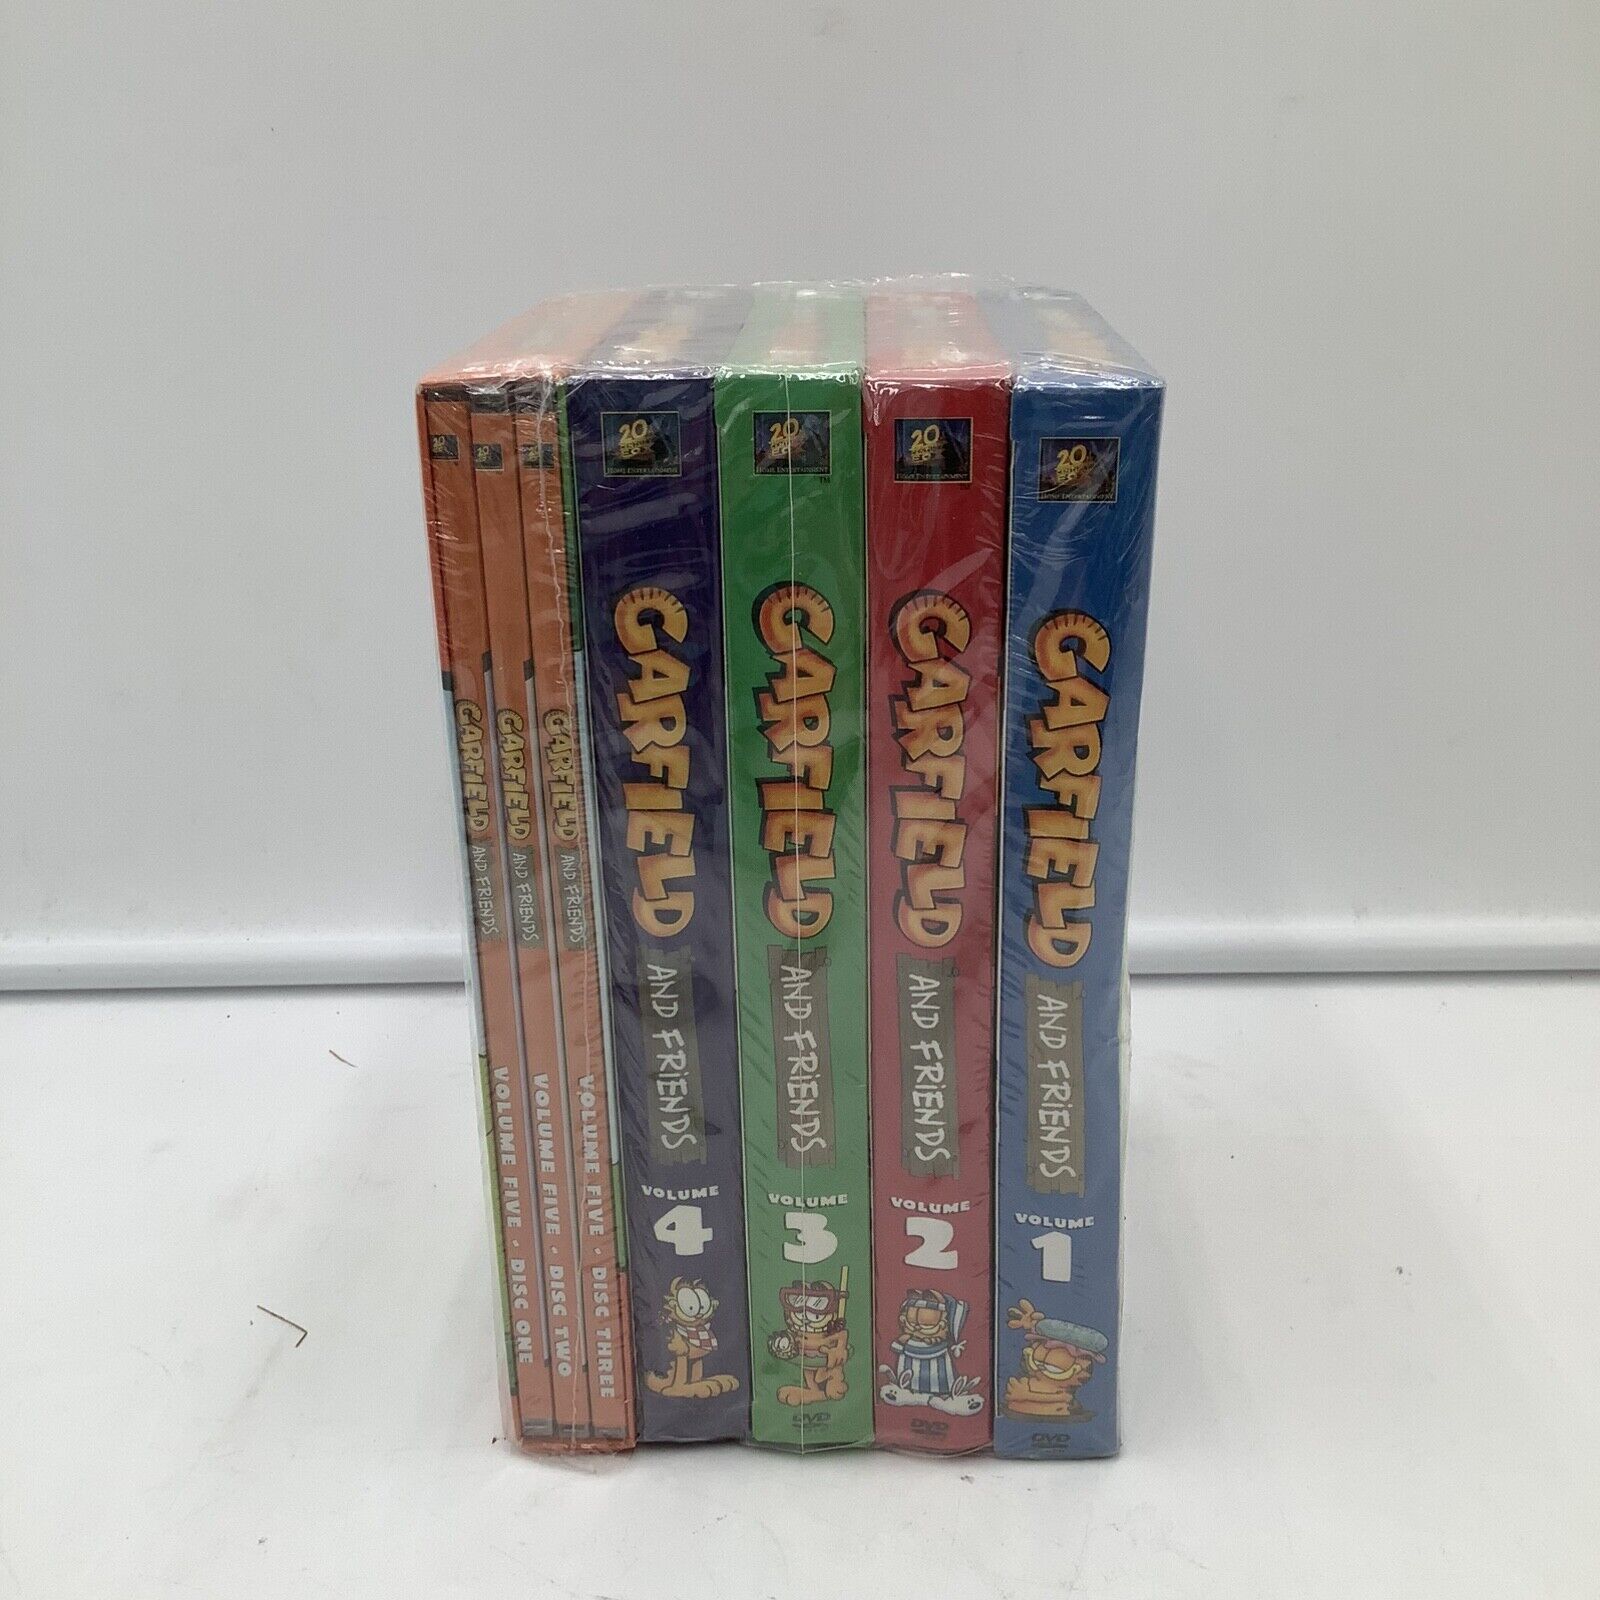 Garfield And Friends Complete Series Volumes 1 2 3 4 5 DVD Set (Sealed)